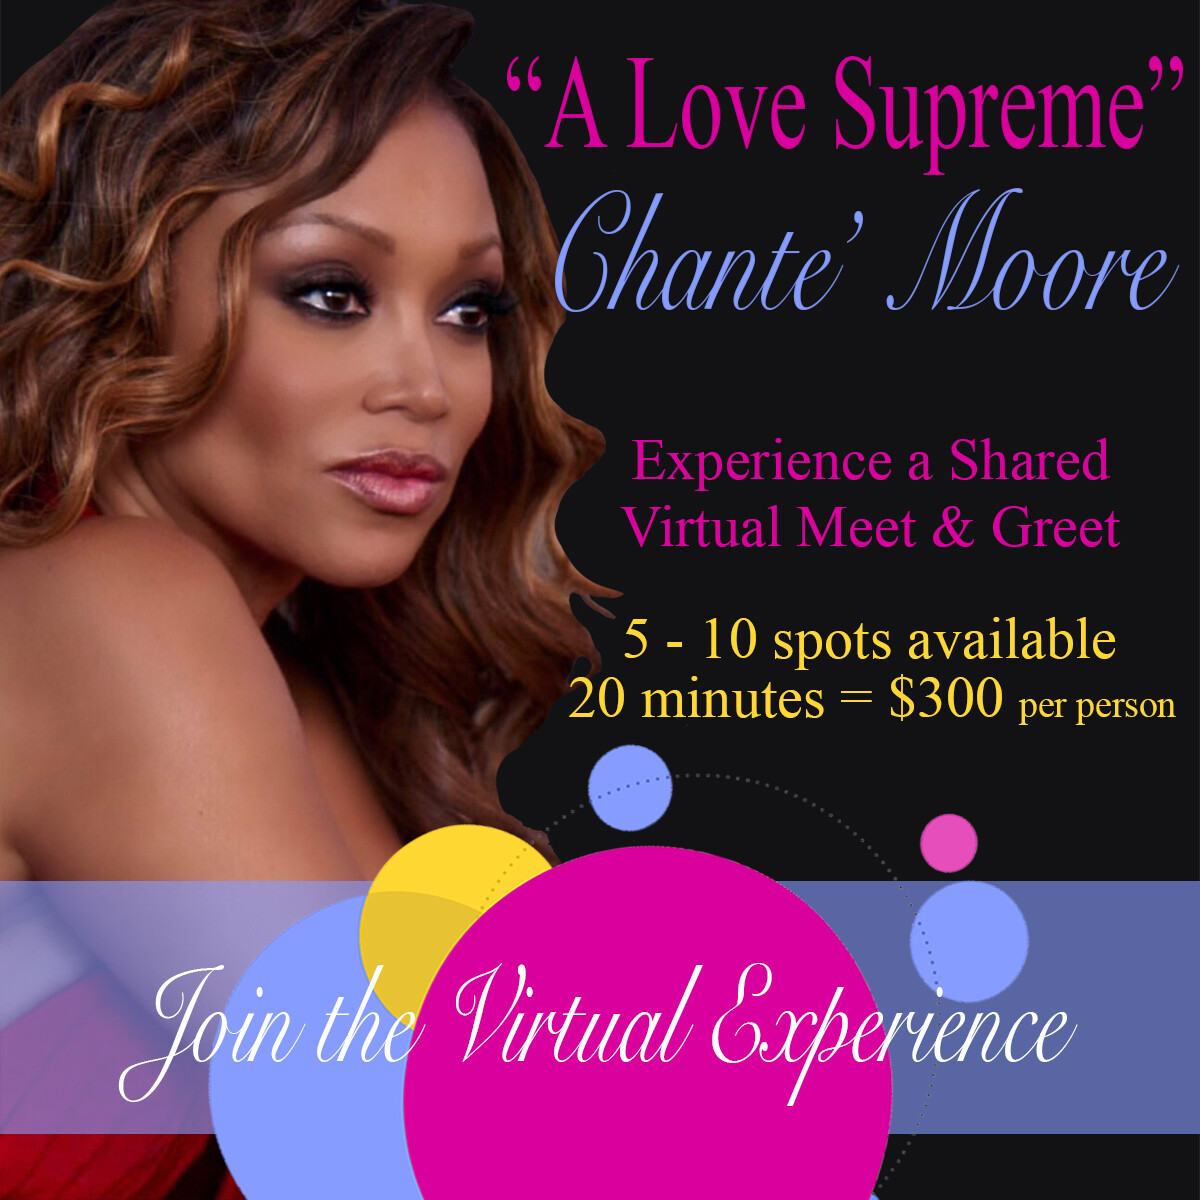 "A Love Supreme" Shared Meet & Greet with Chante' Moore